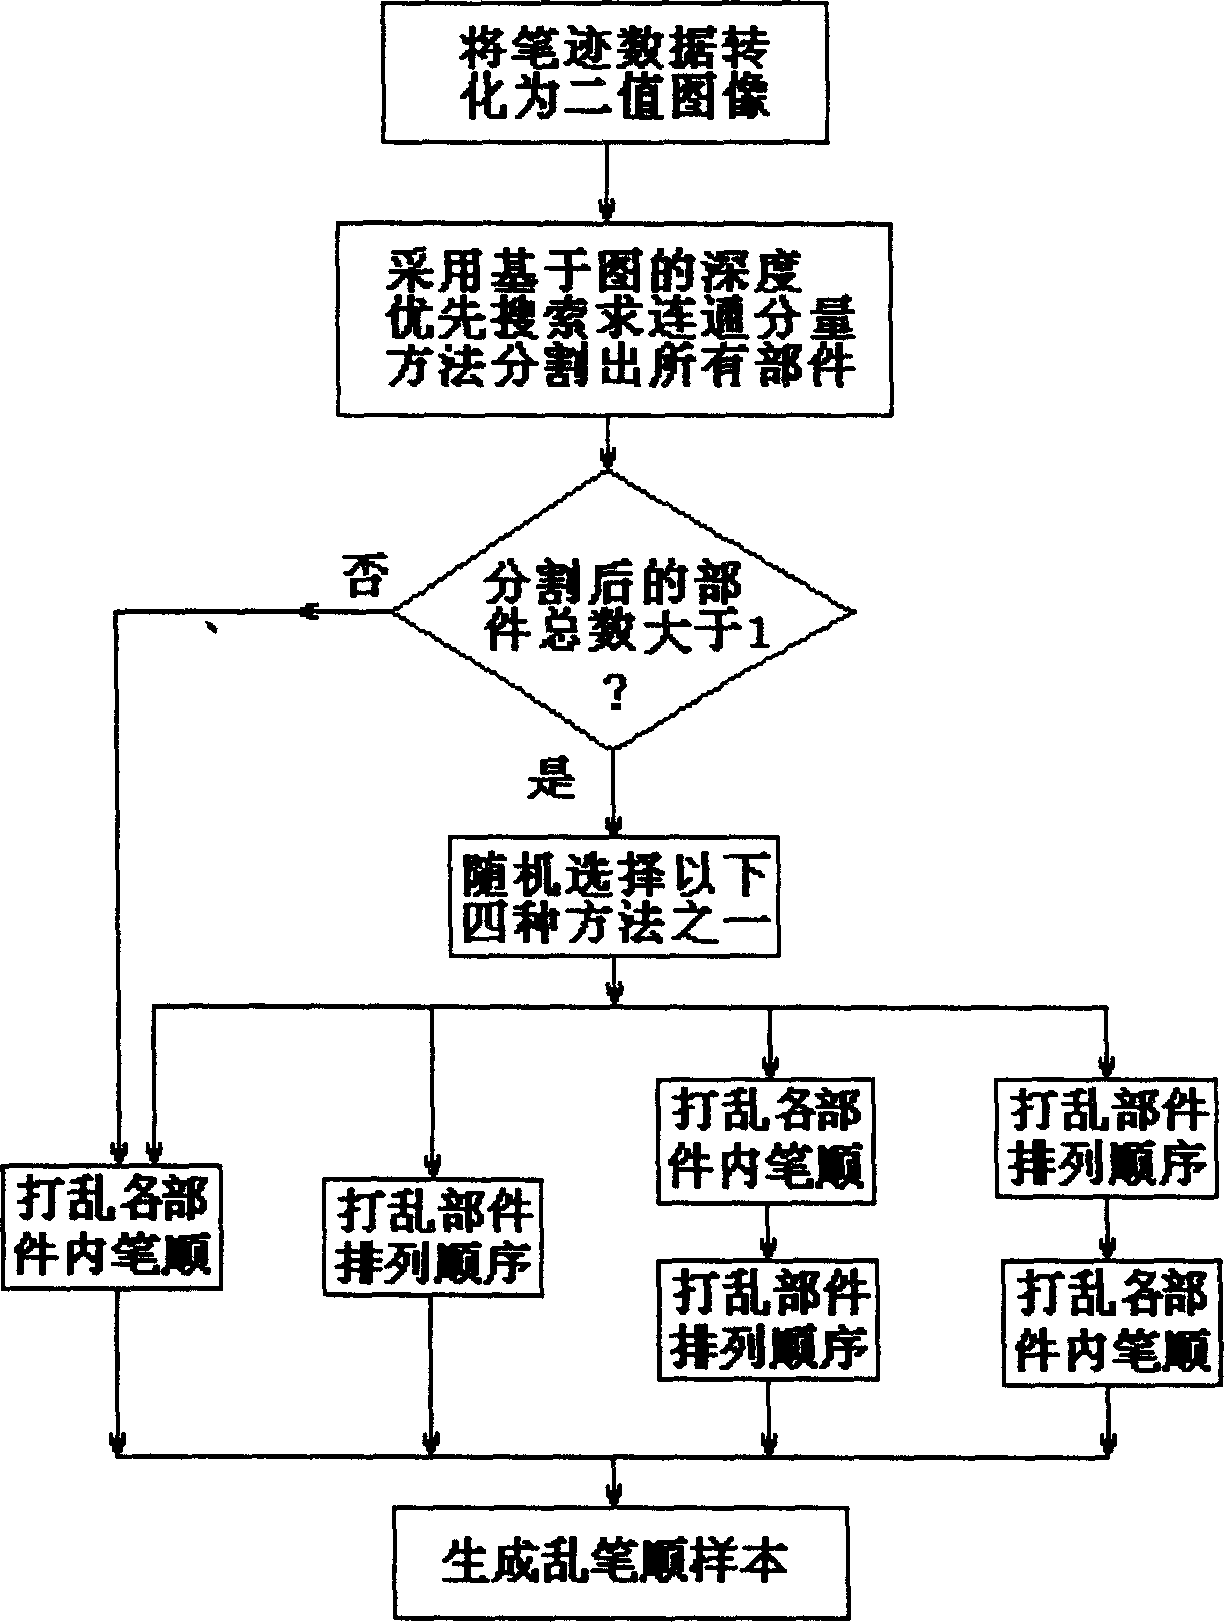 Confused stroke order library establishing method and on-line hand-writing Chinese character identifying and evaluating system